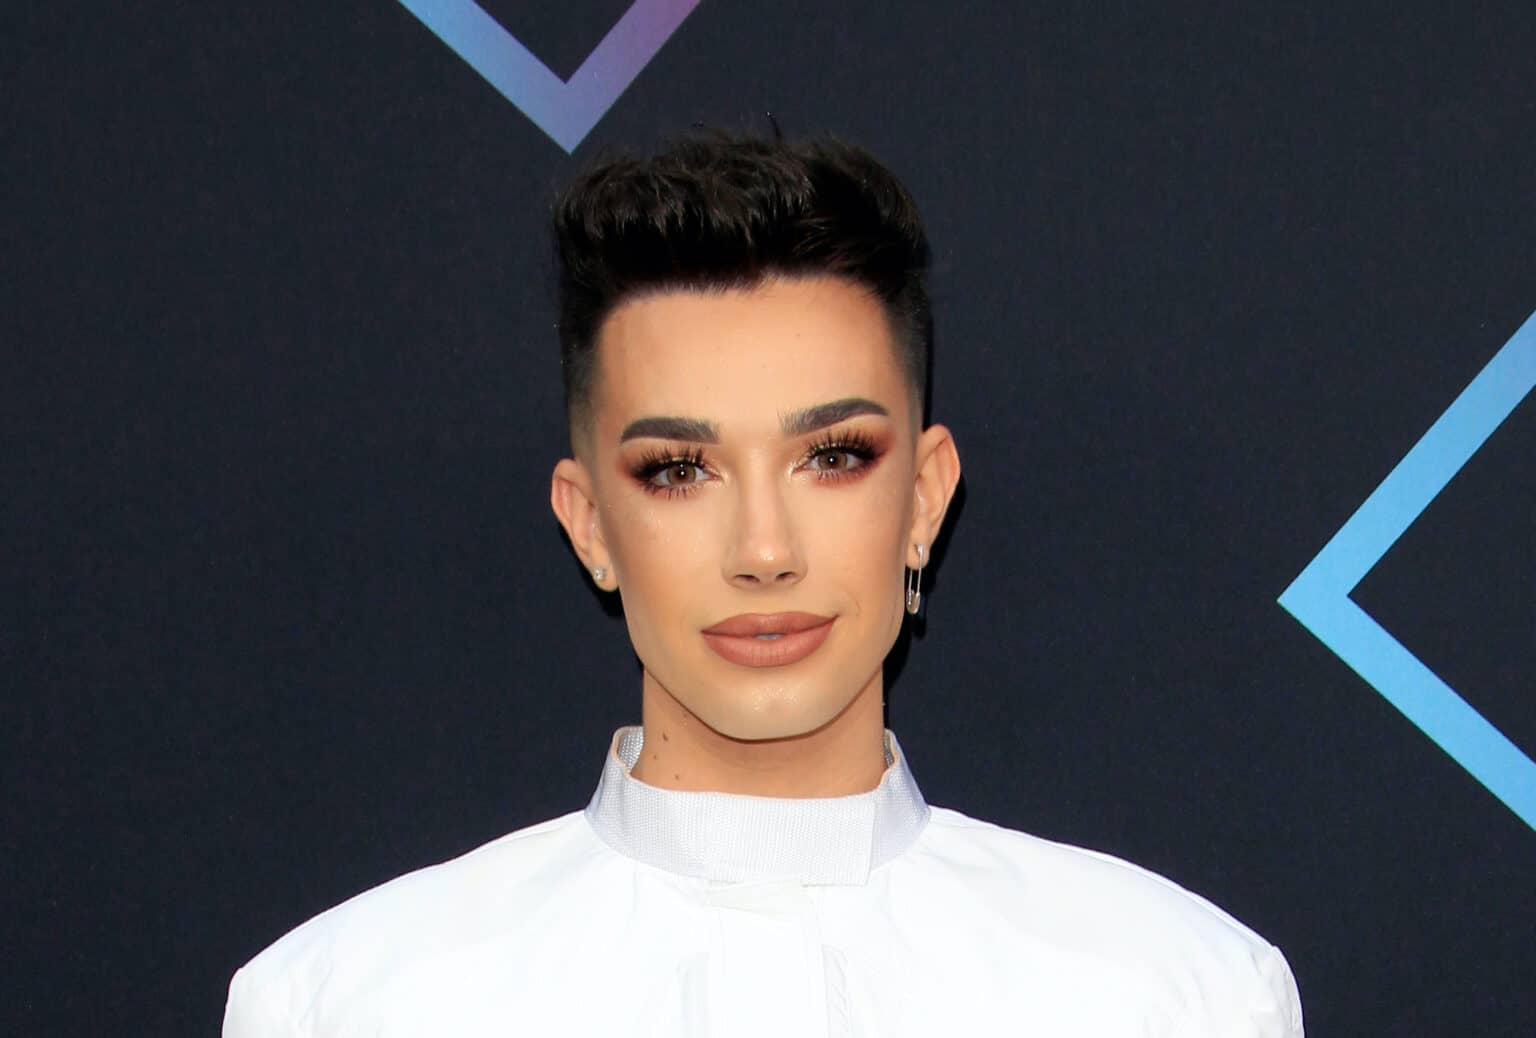 Why Is James Charles Famous?